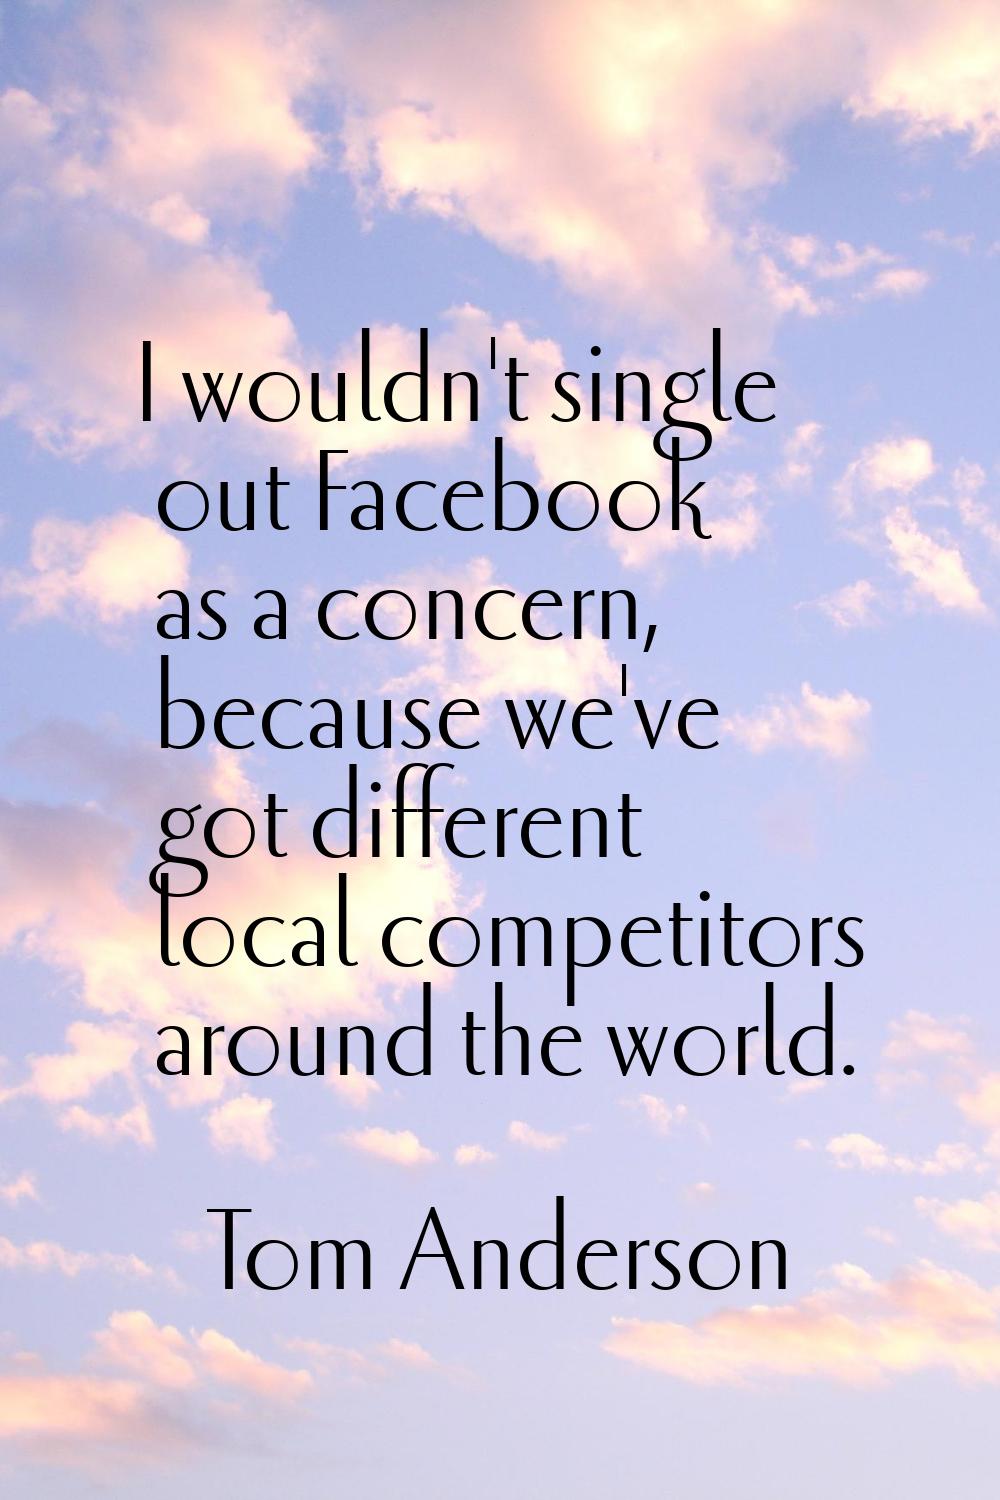 I wouldn't single out Facebook as a concern, because we've got different local competitors around t